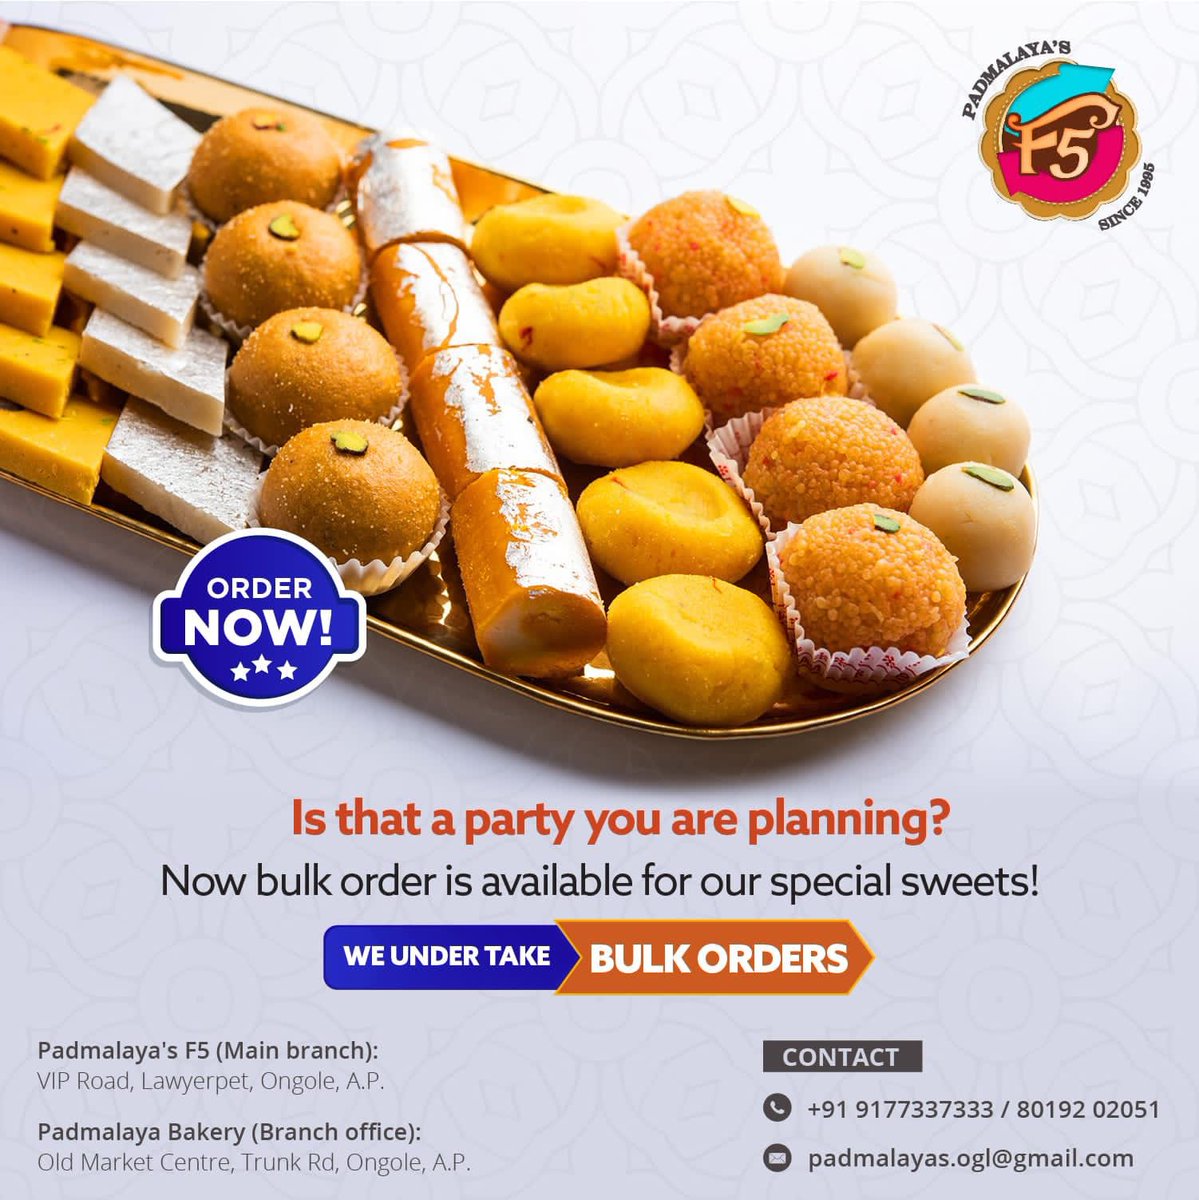 Delectable Sweets for your Celebration of Extraordinary Events Memorably, Have a Glorious Sweet Services from us! 

Contact us for Order: 9177337333
#lovelyladdus
#besrsweet#unbeatabletaste 
#100%quality
#padmlayas
#F5
#ongole